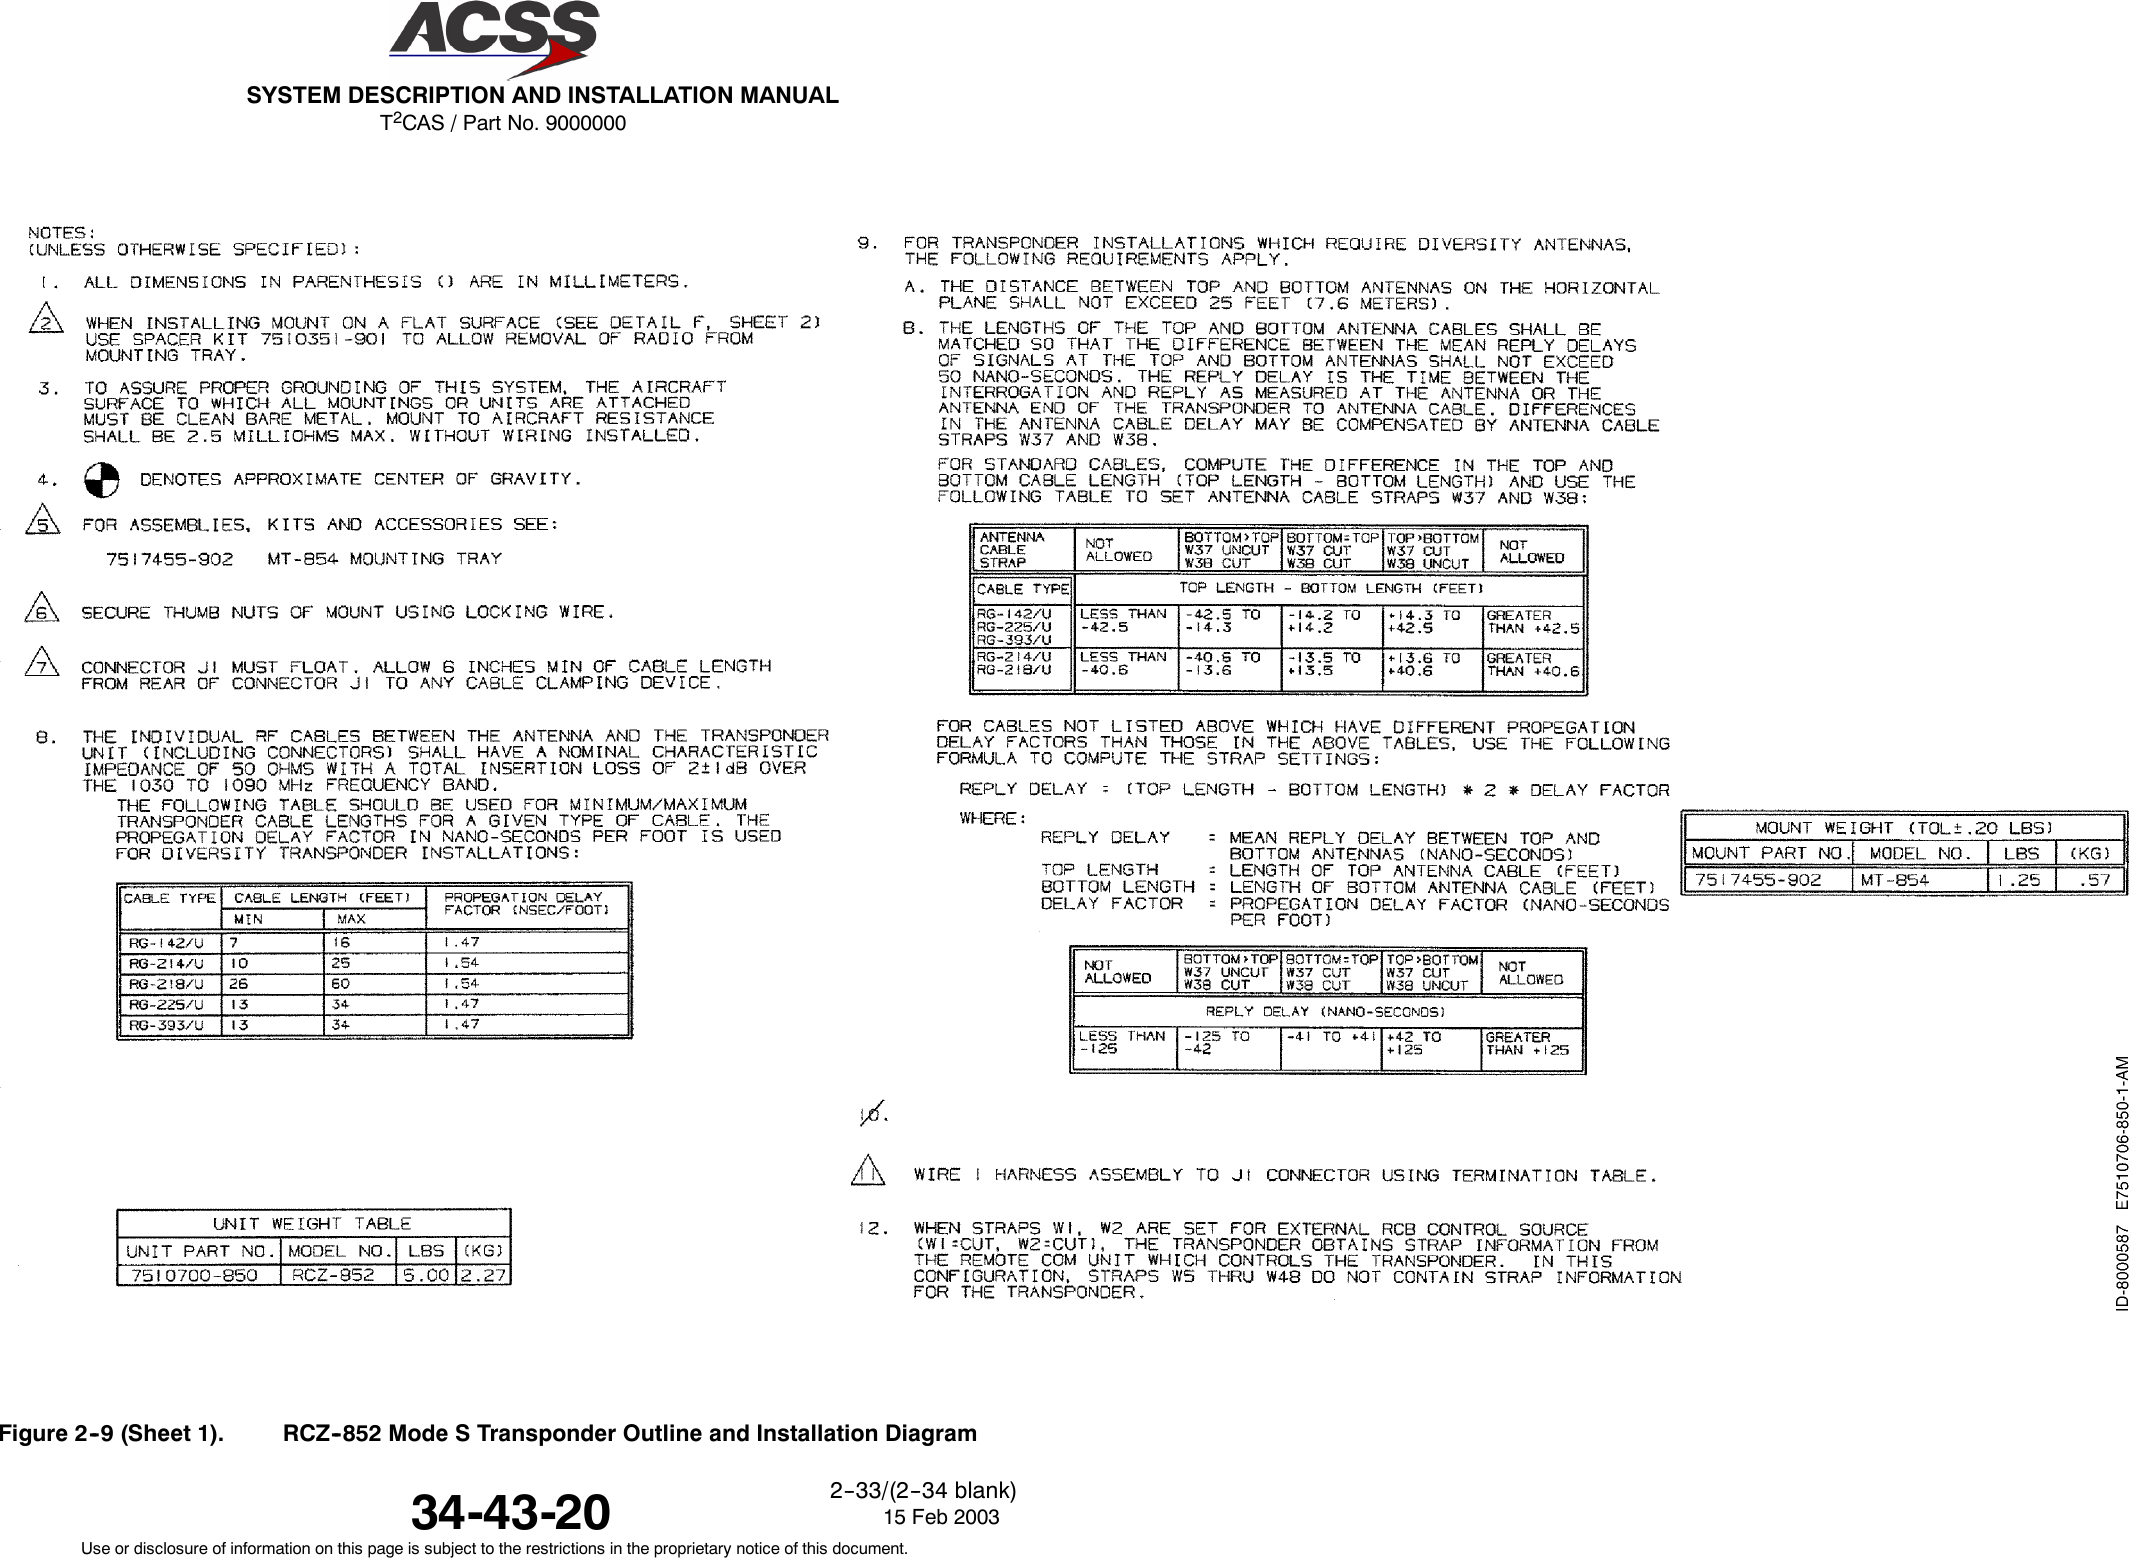 T2CAS / Part No. 9000000SYSTEM DESCRIPTION AND INSTALLATION MANUAL34-43-20 15 Feb 2003Use or disclosure of information on this page is subject to the restrictions in the proprietary notice of this document.2--33/(2--34 blank)Figure 2--9 (Sheet 1). RCZ--852 Mode S Transponder Outline and Installation Diagram